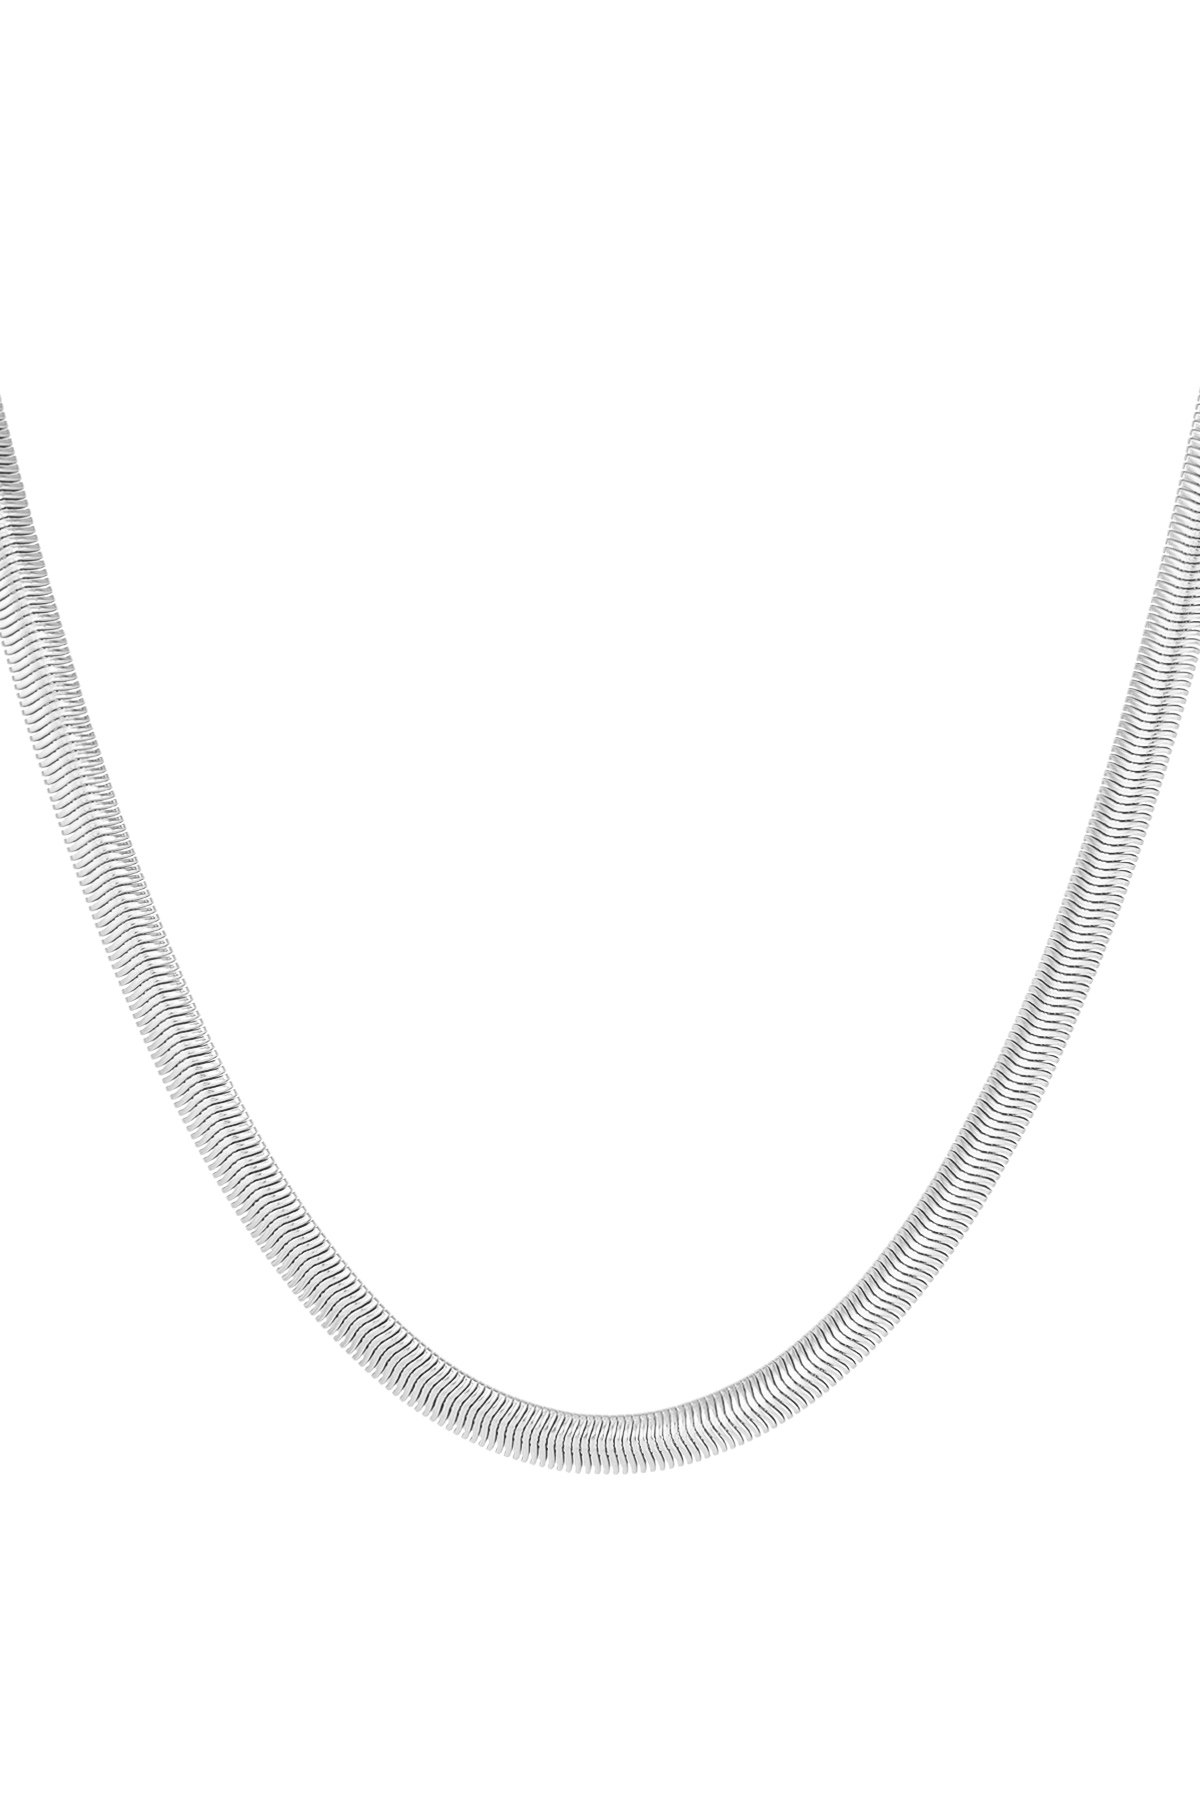 Unisex chain flat with structure - silver-6.0MM